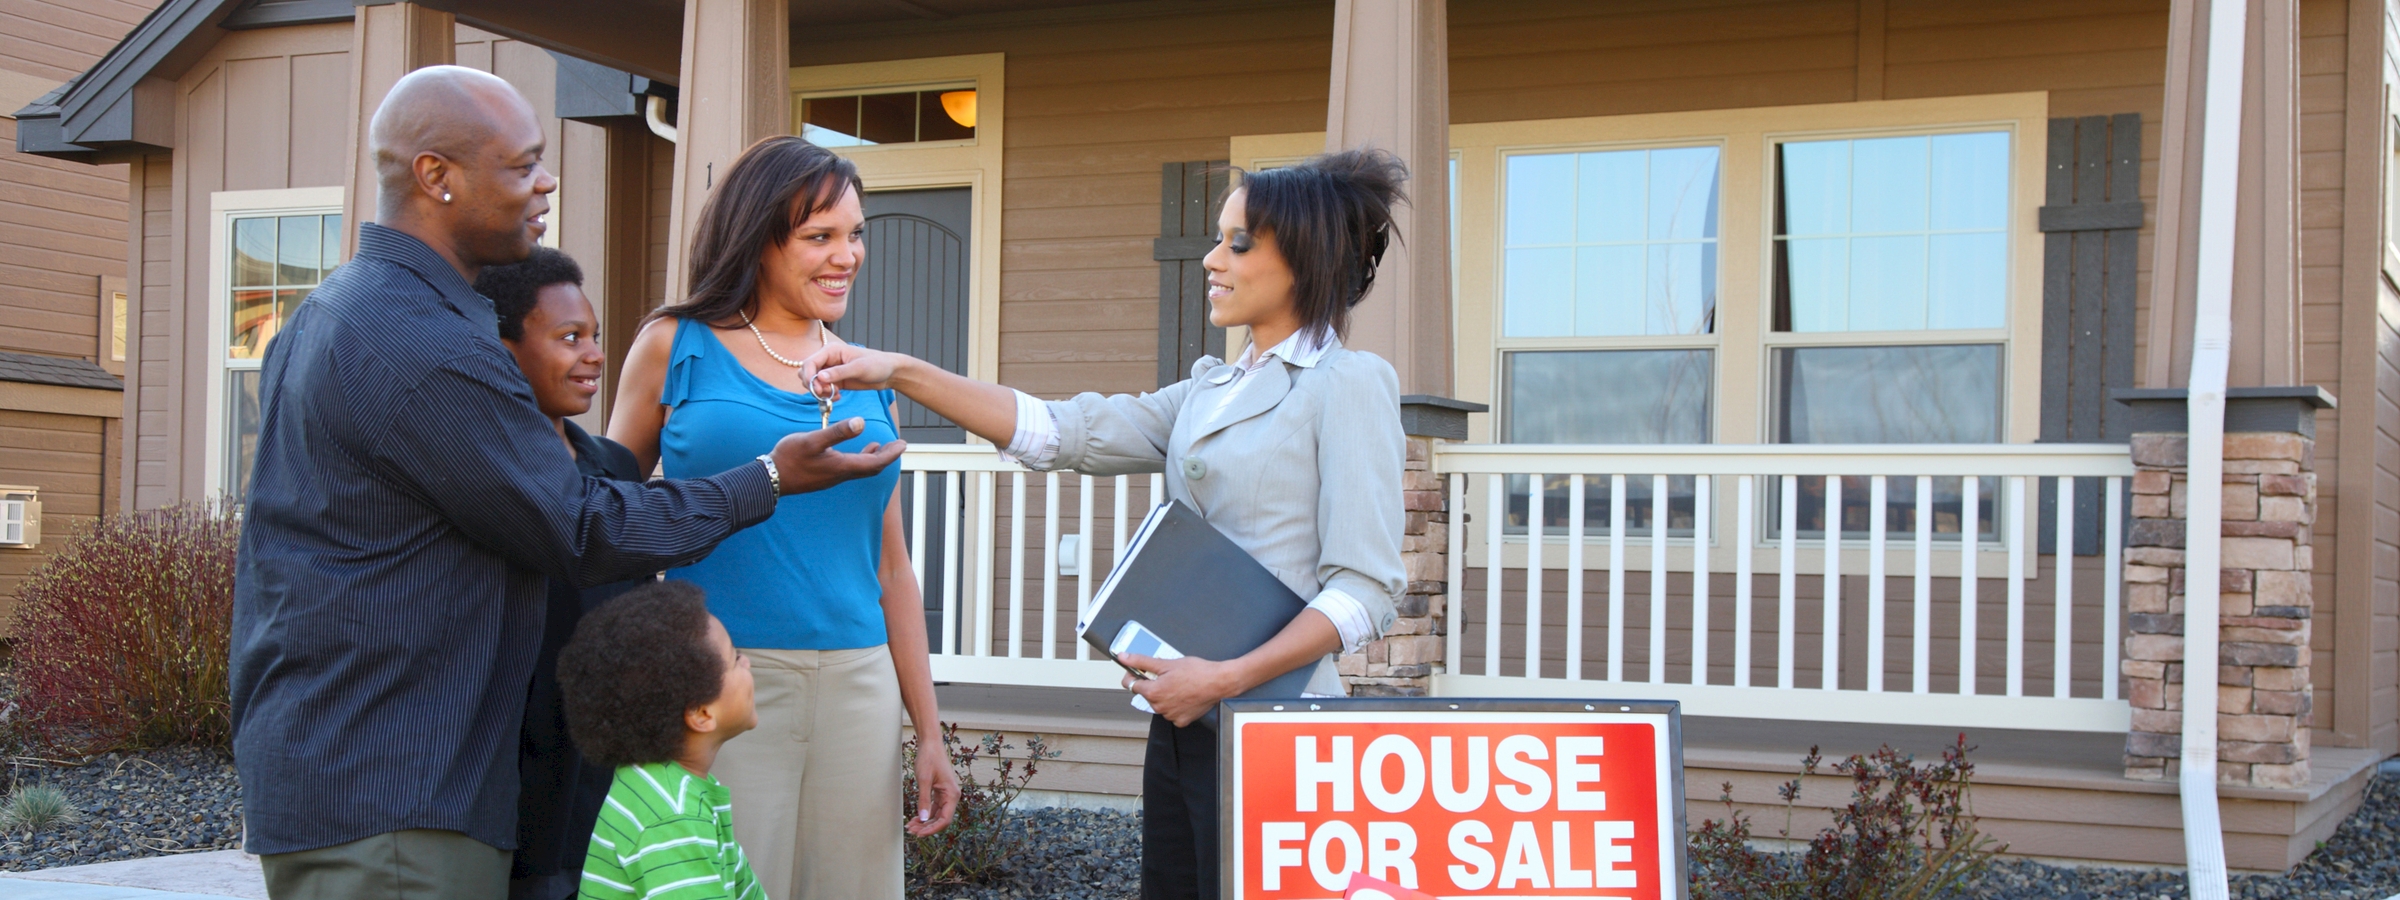 Why become a homeowner instead of a tenant?